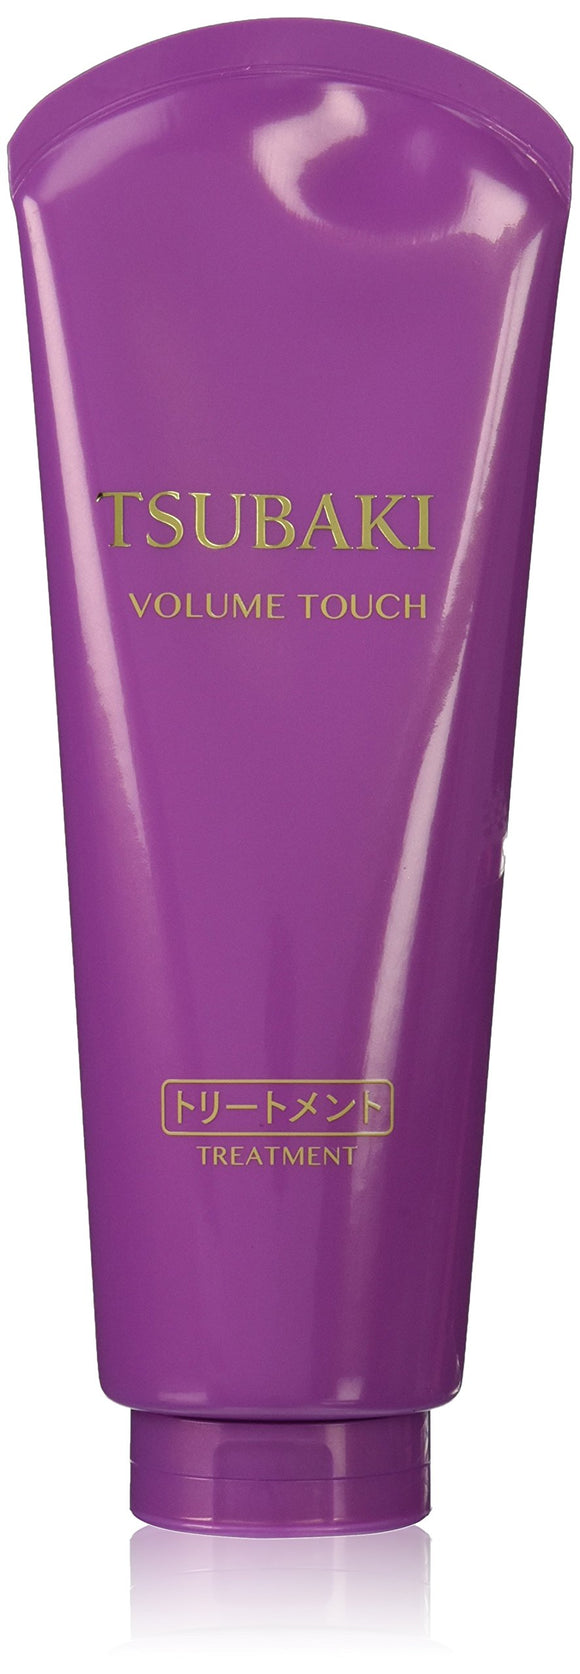 TSUBAKI Volume Touch Treatment (for flat hair at the root) 180g